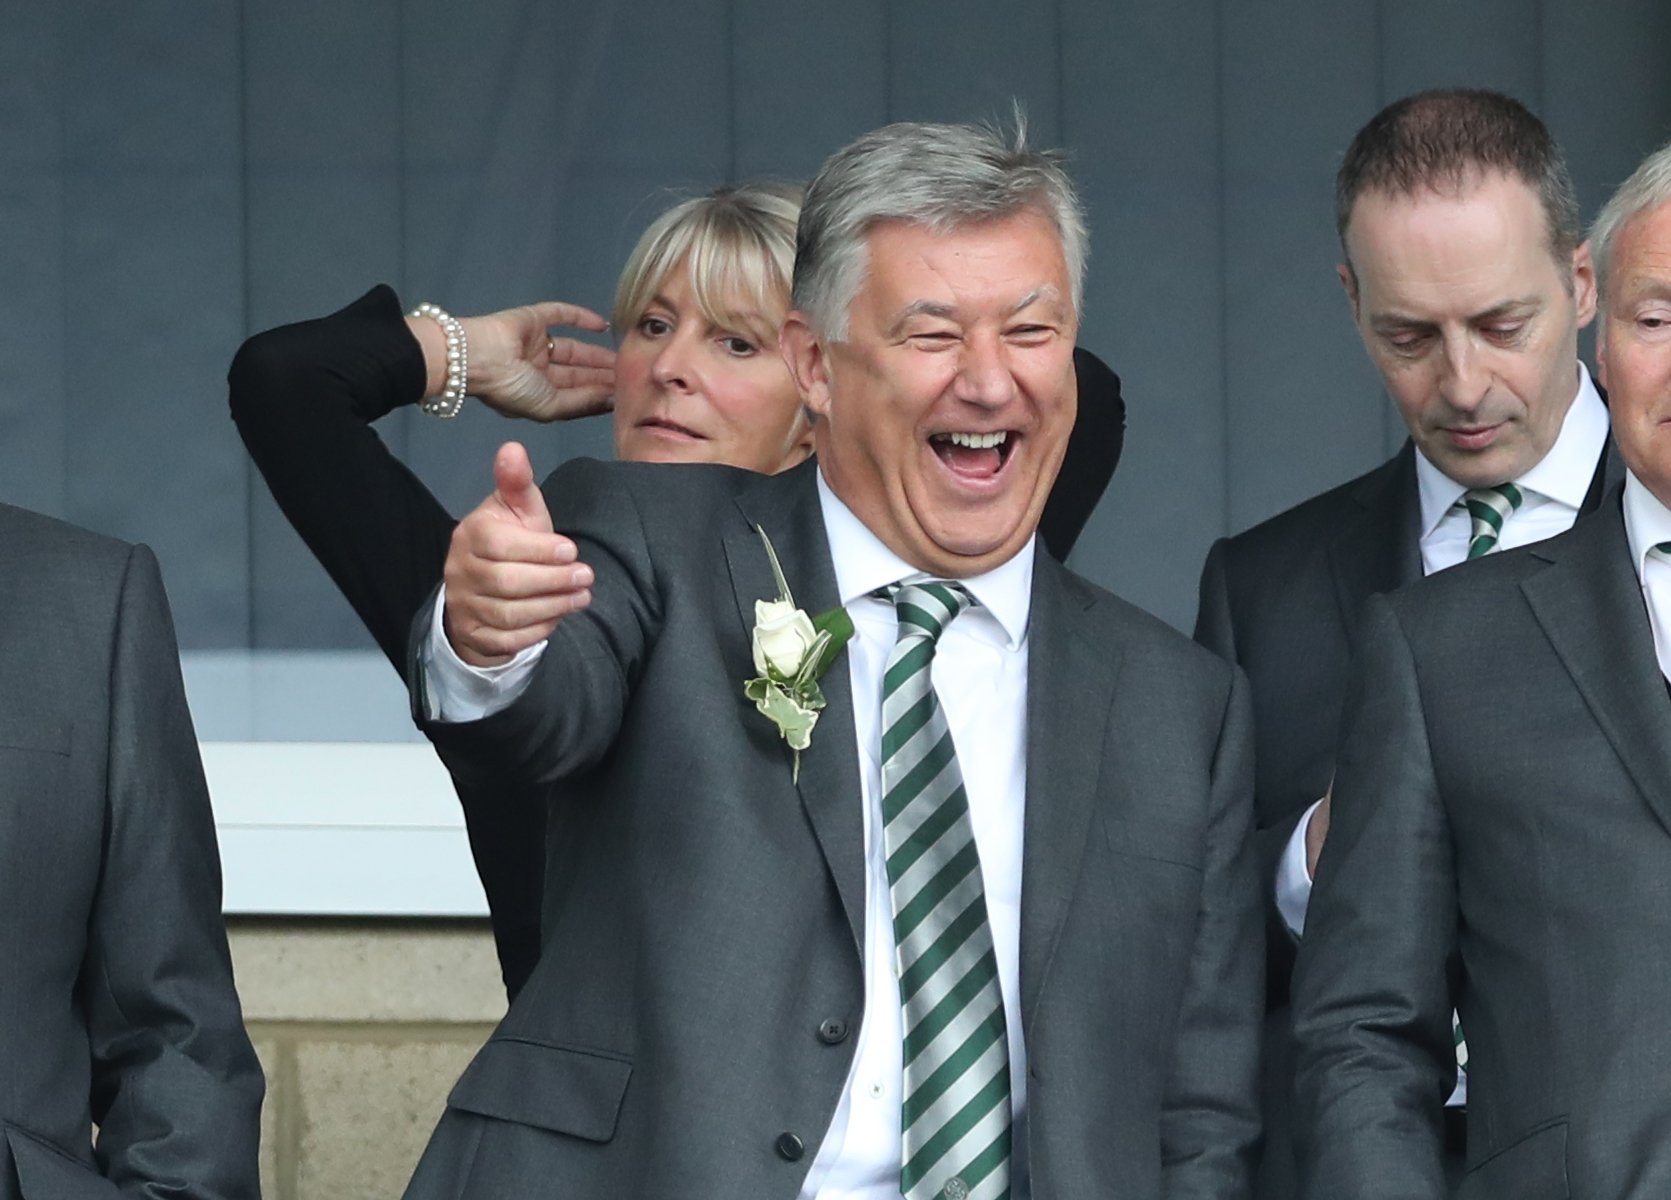 Celtic fans divided over Peter Lawwell departure and legacy